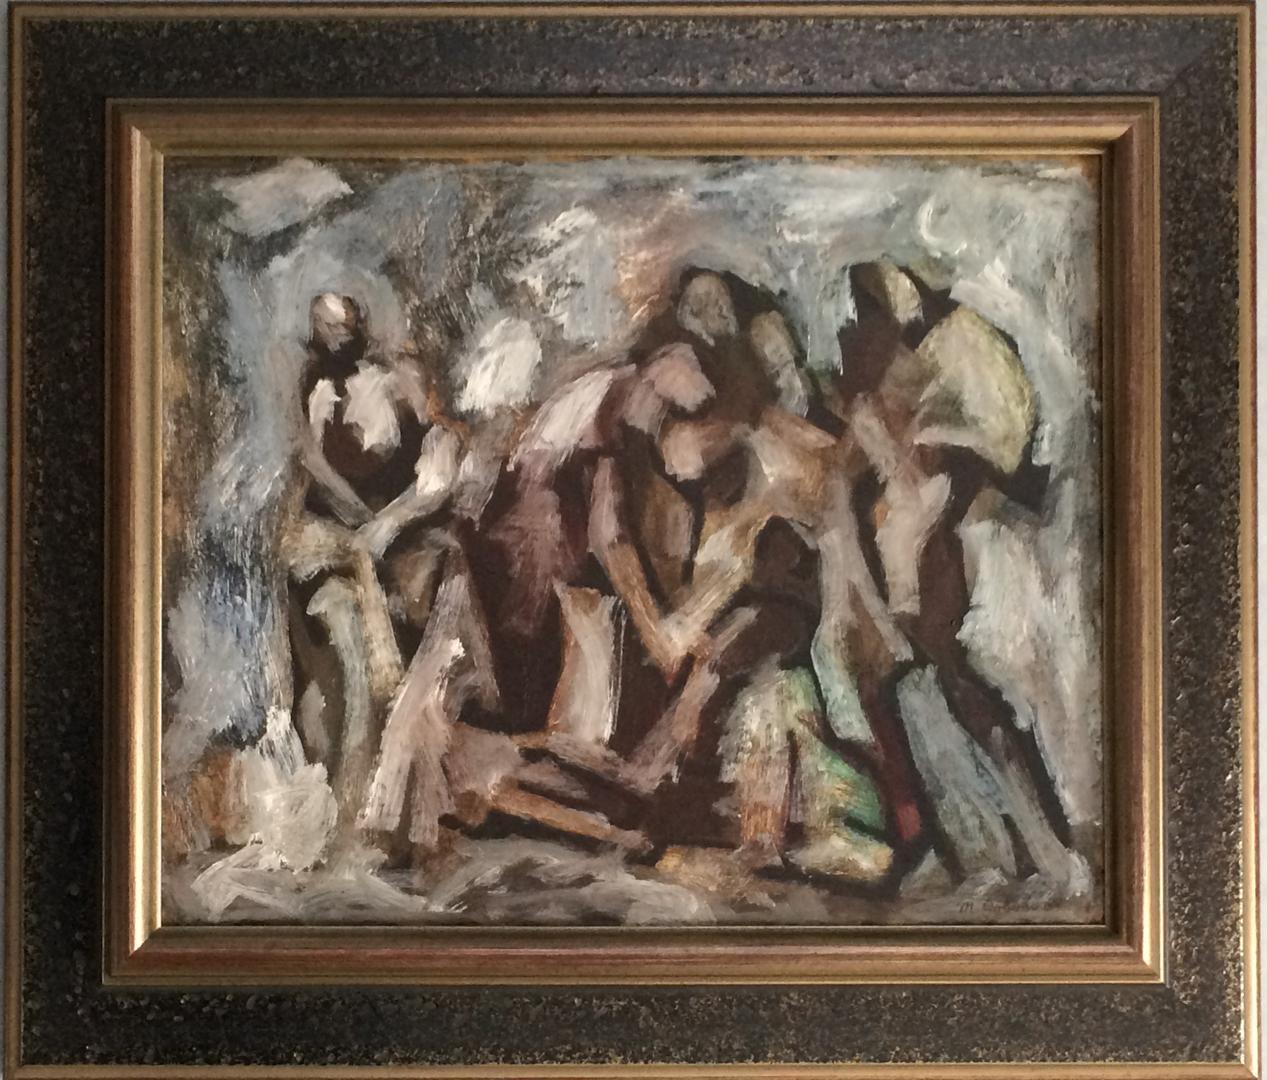 Rescue abstract figurative oil painting by Maurice Golubov